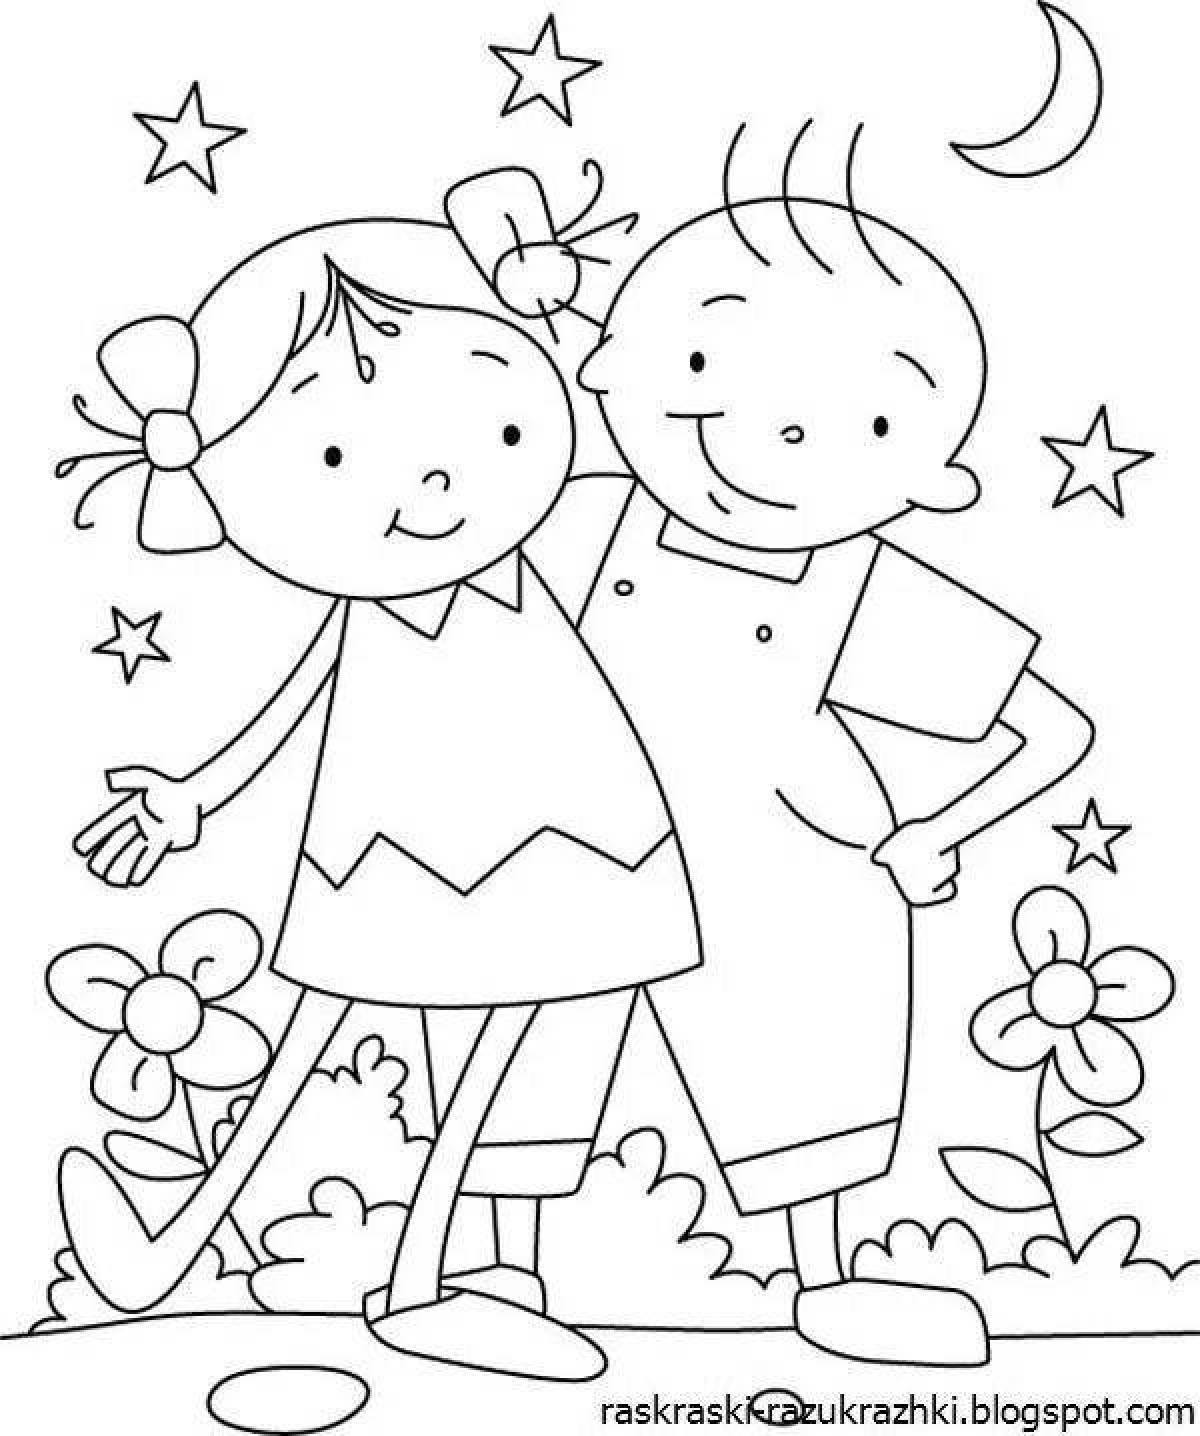 Colorful and fun children's friendship coloring book